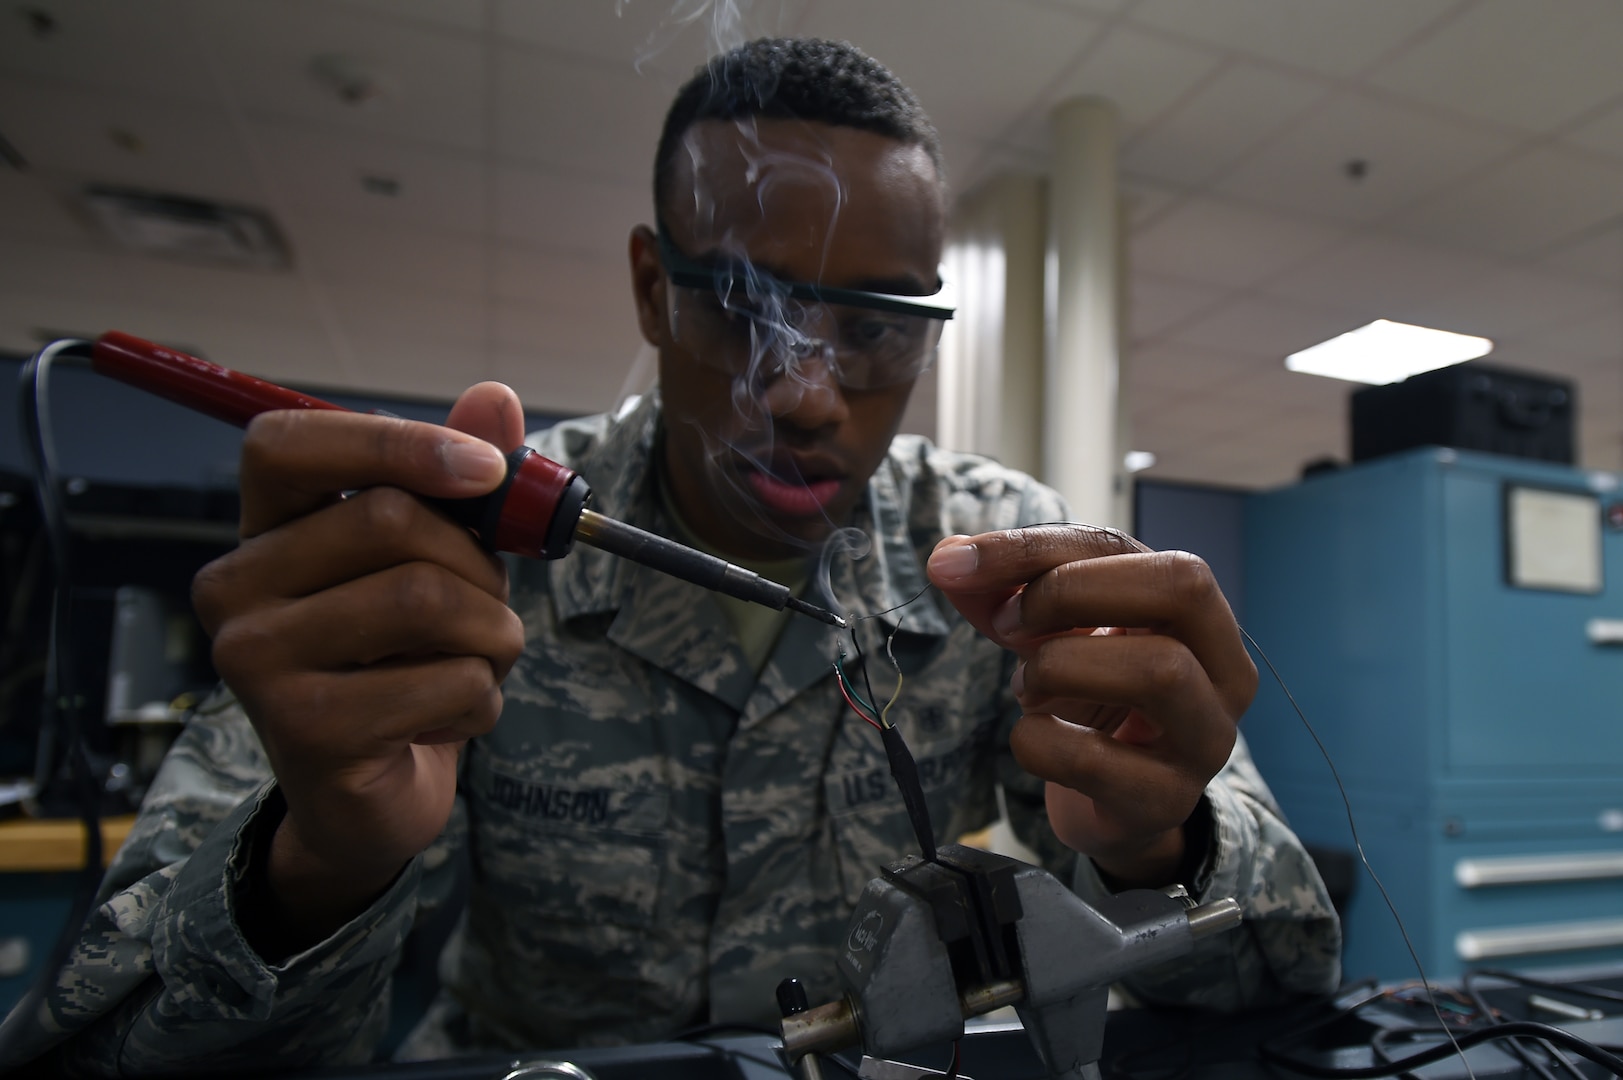 Senior Airman Donnell Johnson, 59th Medical Logistics and Readiness Squadron biomedical equipment technician, solders load cell wires Nov. 17 at the Wilford Hall Ambulatory Surgical Center on Joint Base San Antonio-Lackland, Texas. Load cells are used in electronic scales to measure weight and display the weight digitally. (U.S. Air Force photo/Staff Sgt. Jason Huddleston)